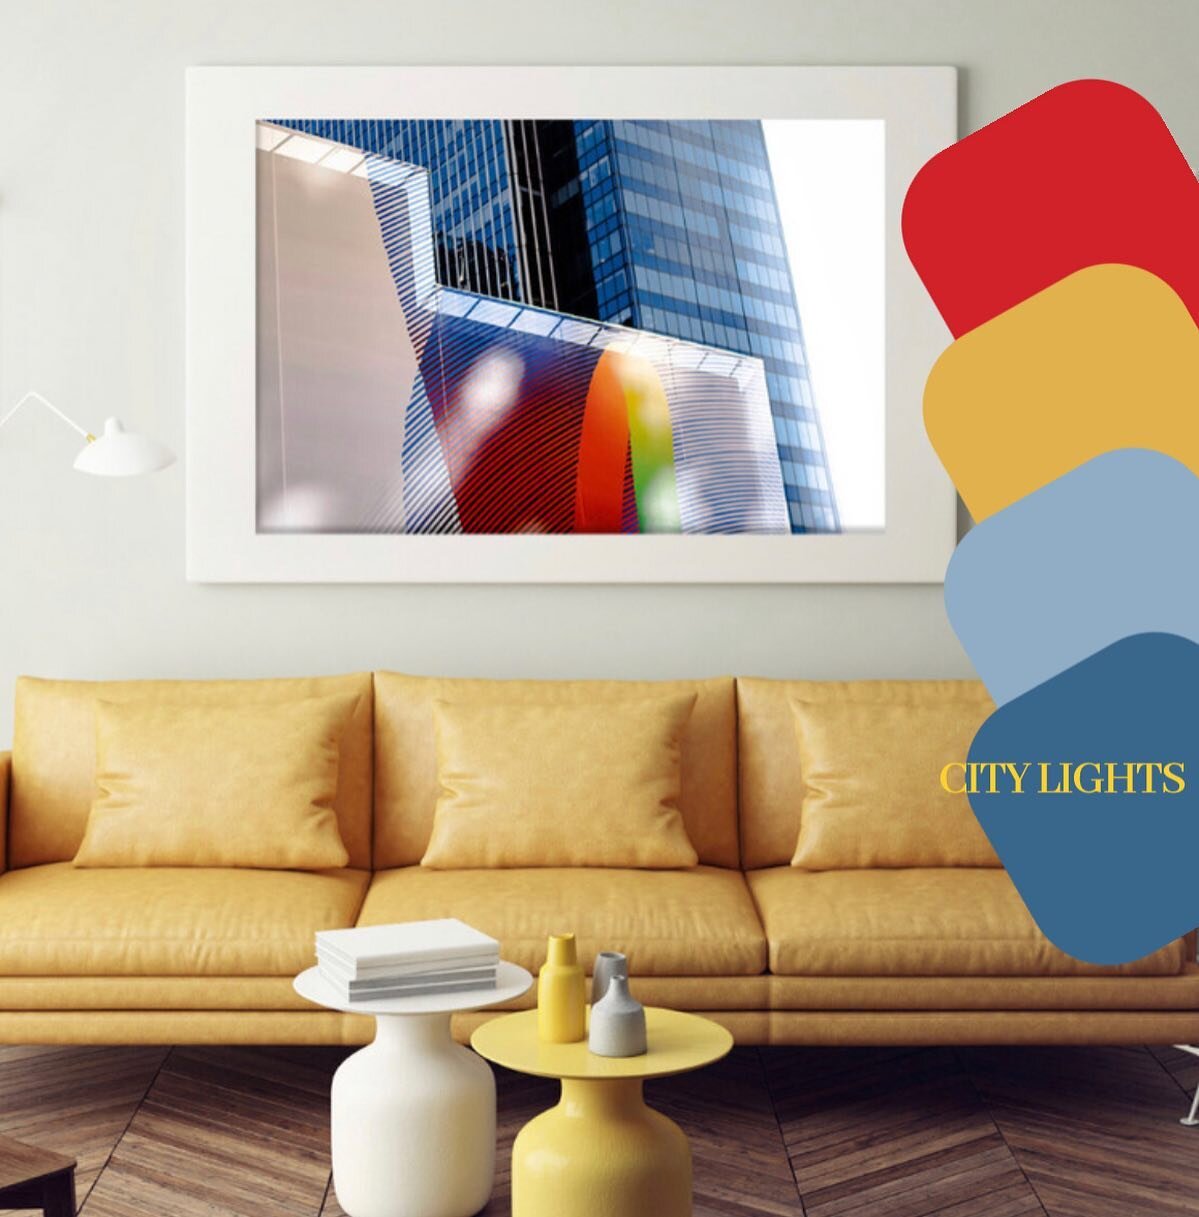 Pair CITY LIGHTS with BOLD  primary colors and textures 🏙️ 🌆
#photo #photographer #photoart #interiordesign #art #gallery #gallerywall